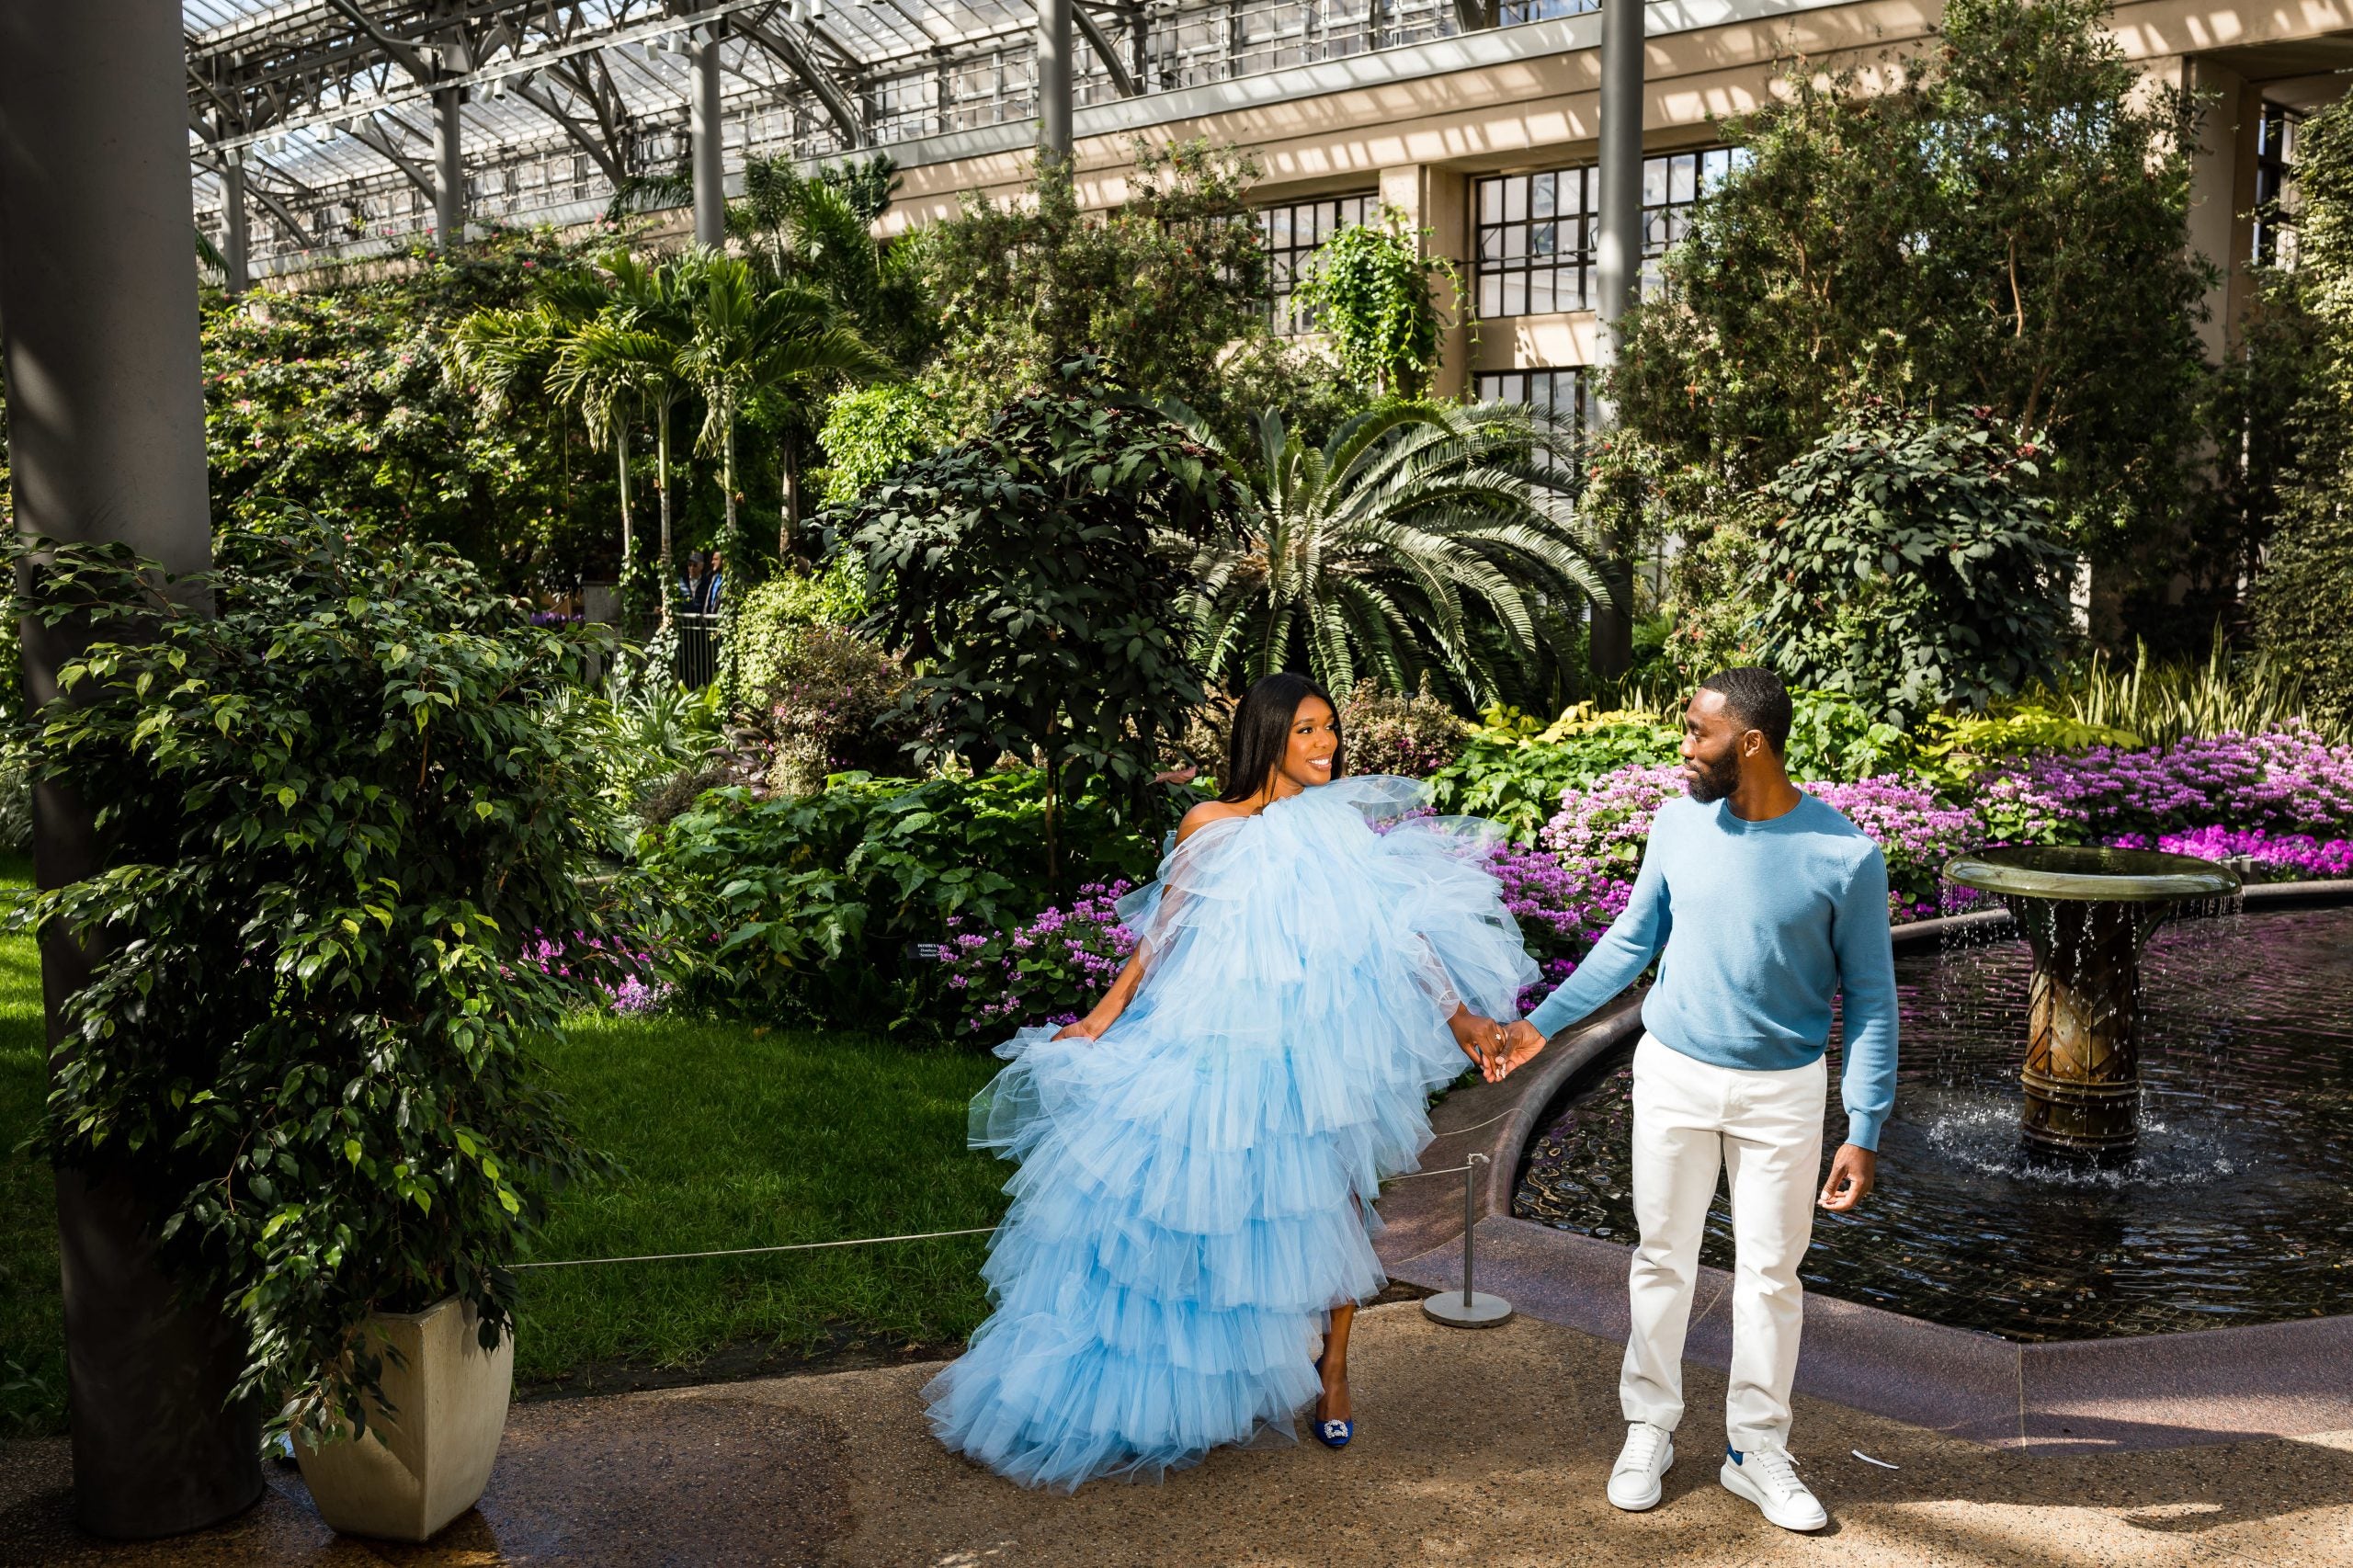 Old, New, Borrowed, Blue: This Couple’s Epic Engagement Shoot Included Four Fabulous Outfit Changes